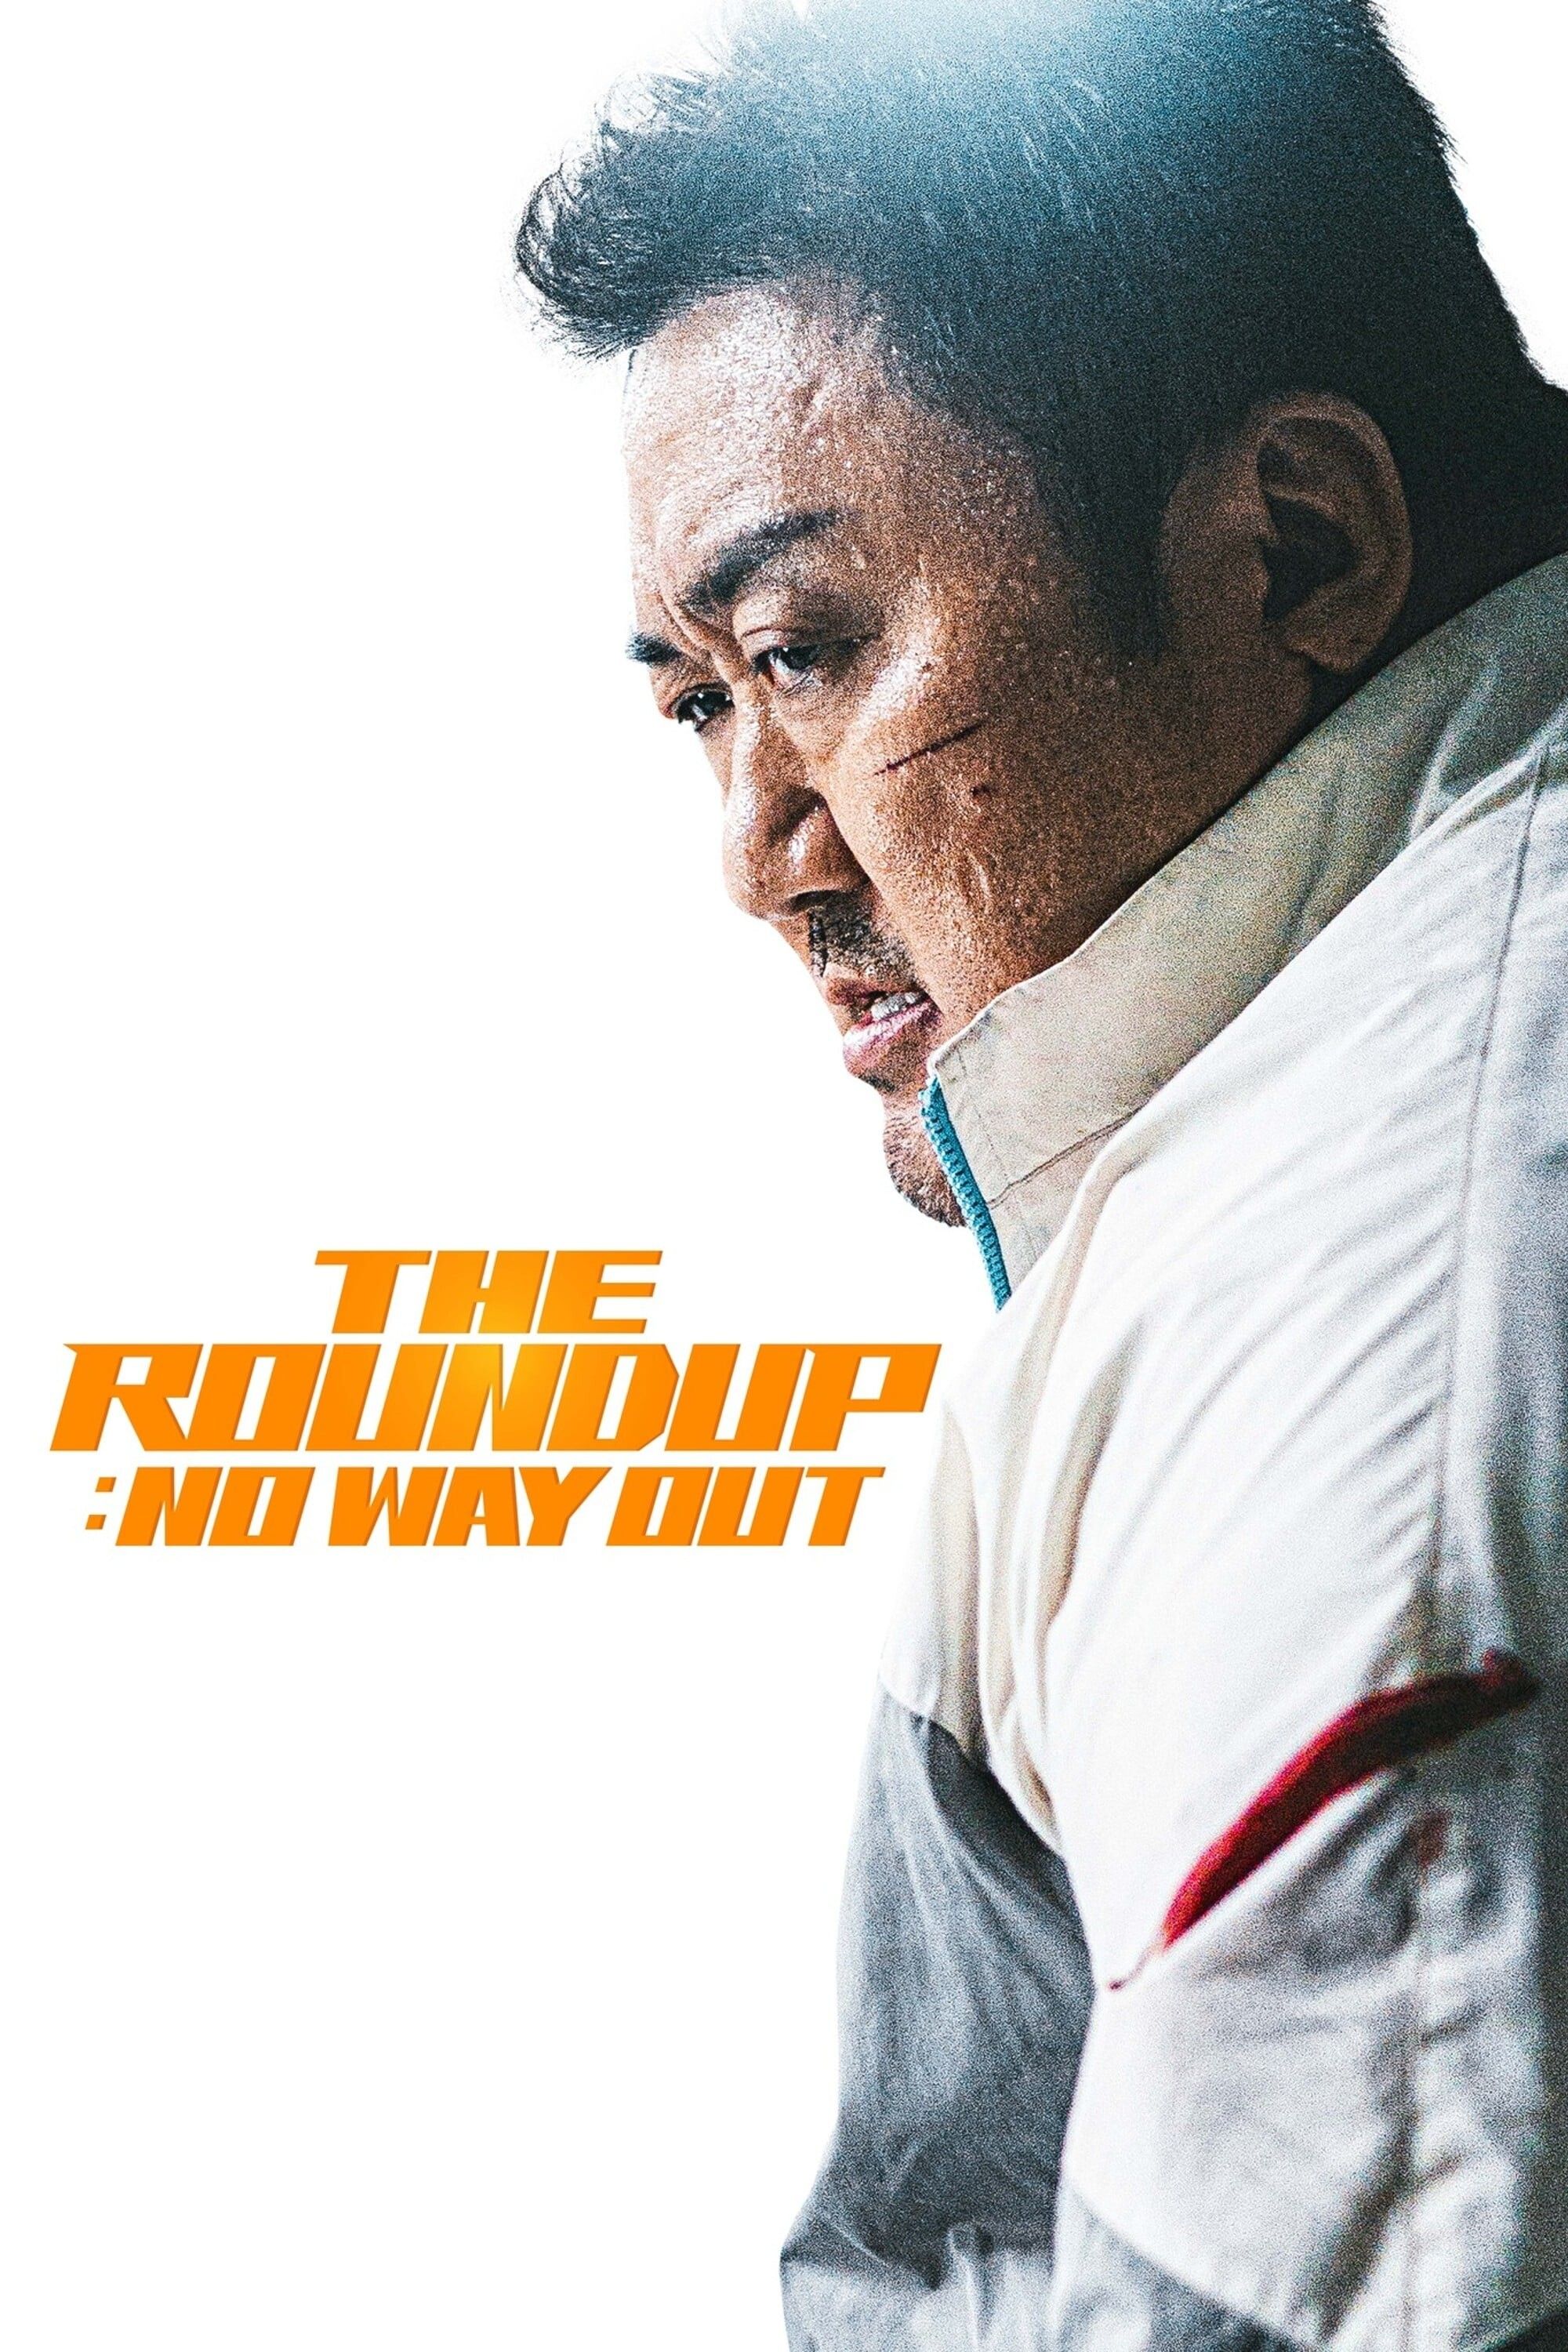 The Roundup: No Way Out (2023) Movie Information & Trailers